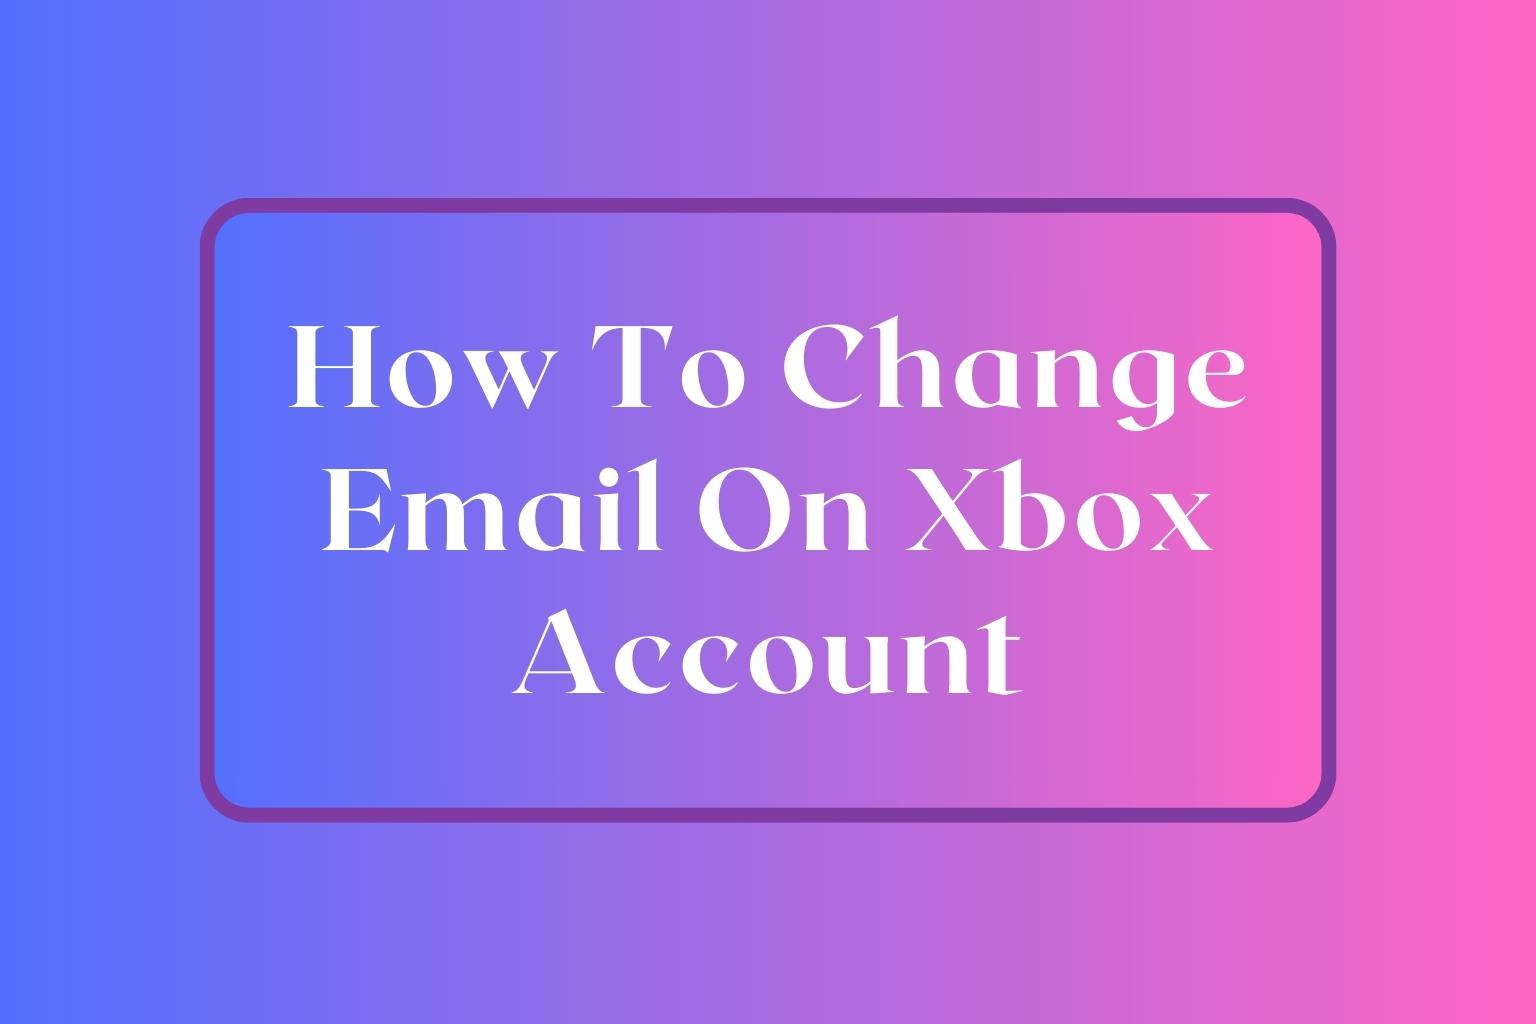 How To Change Email On Xbox Account